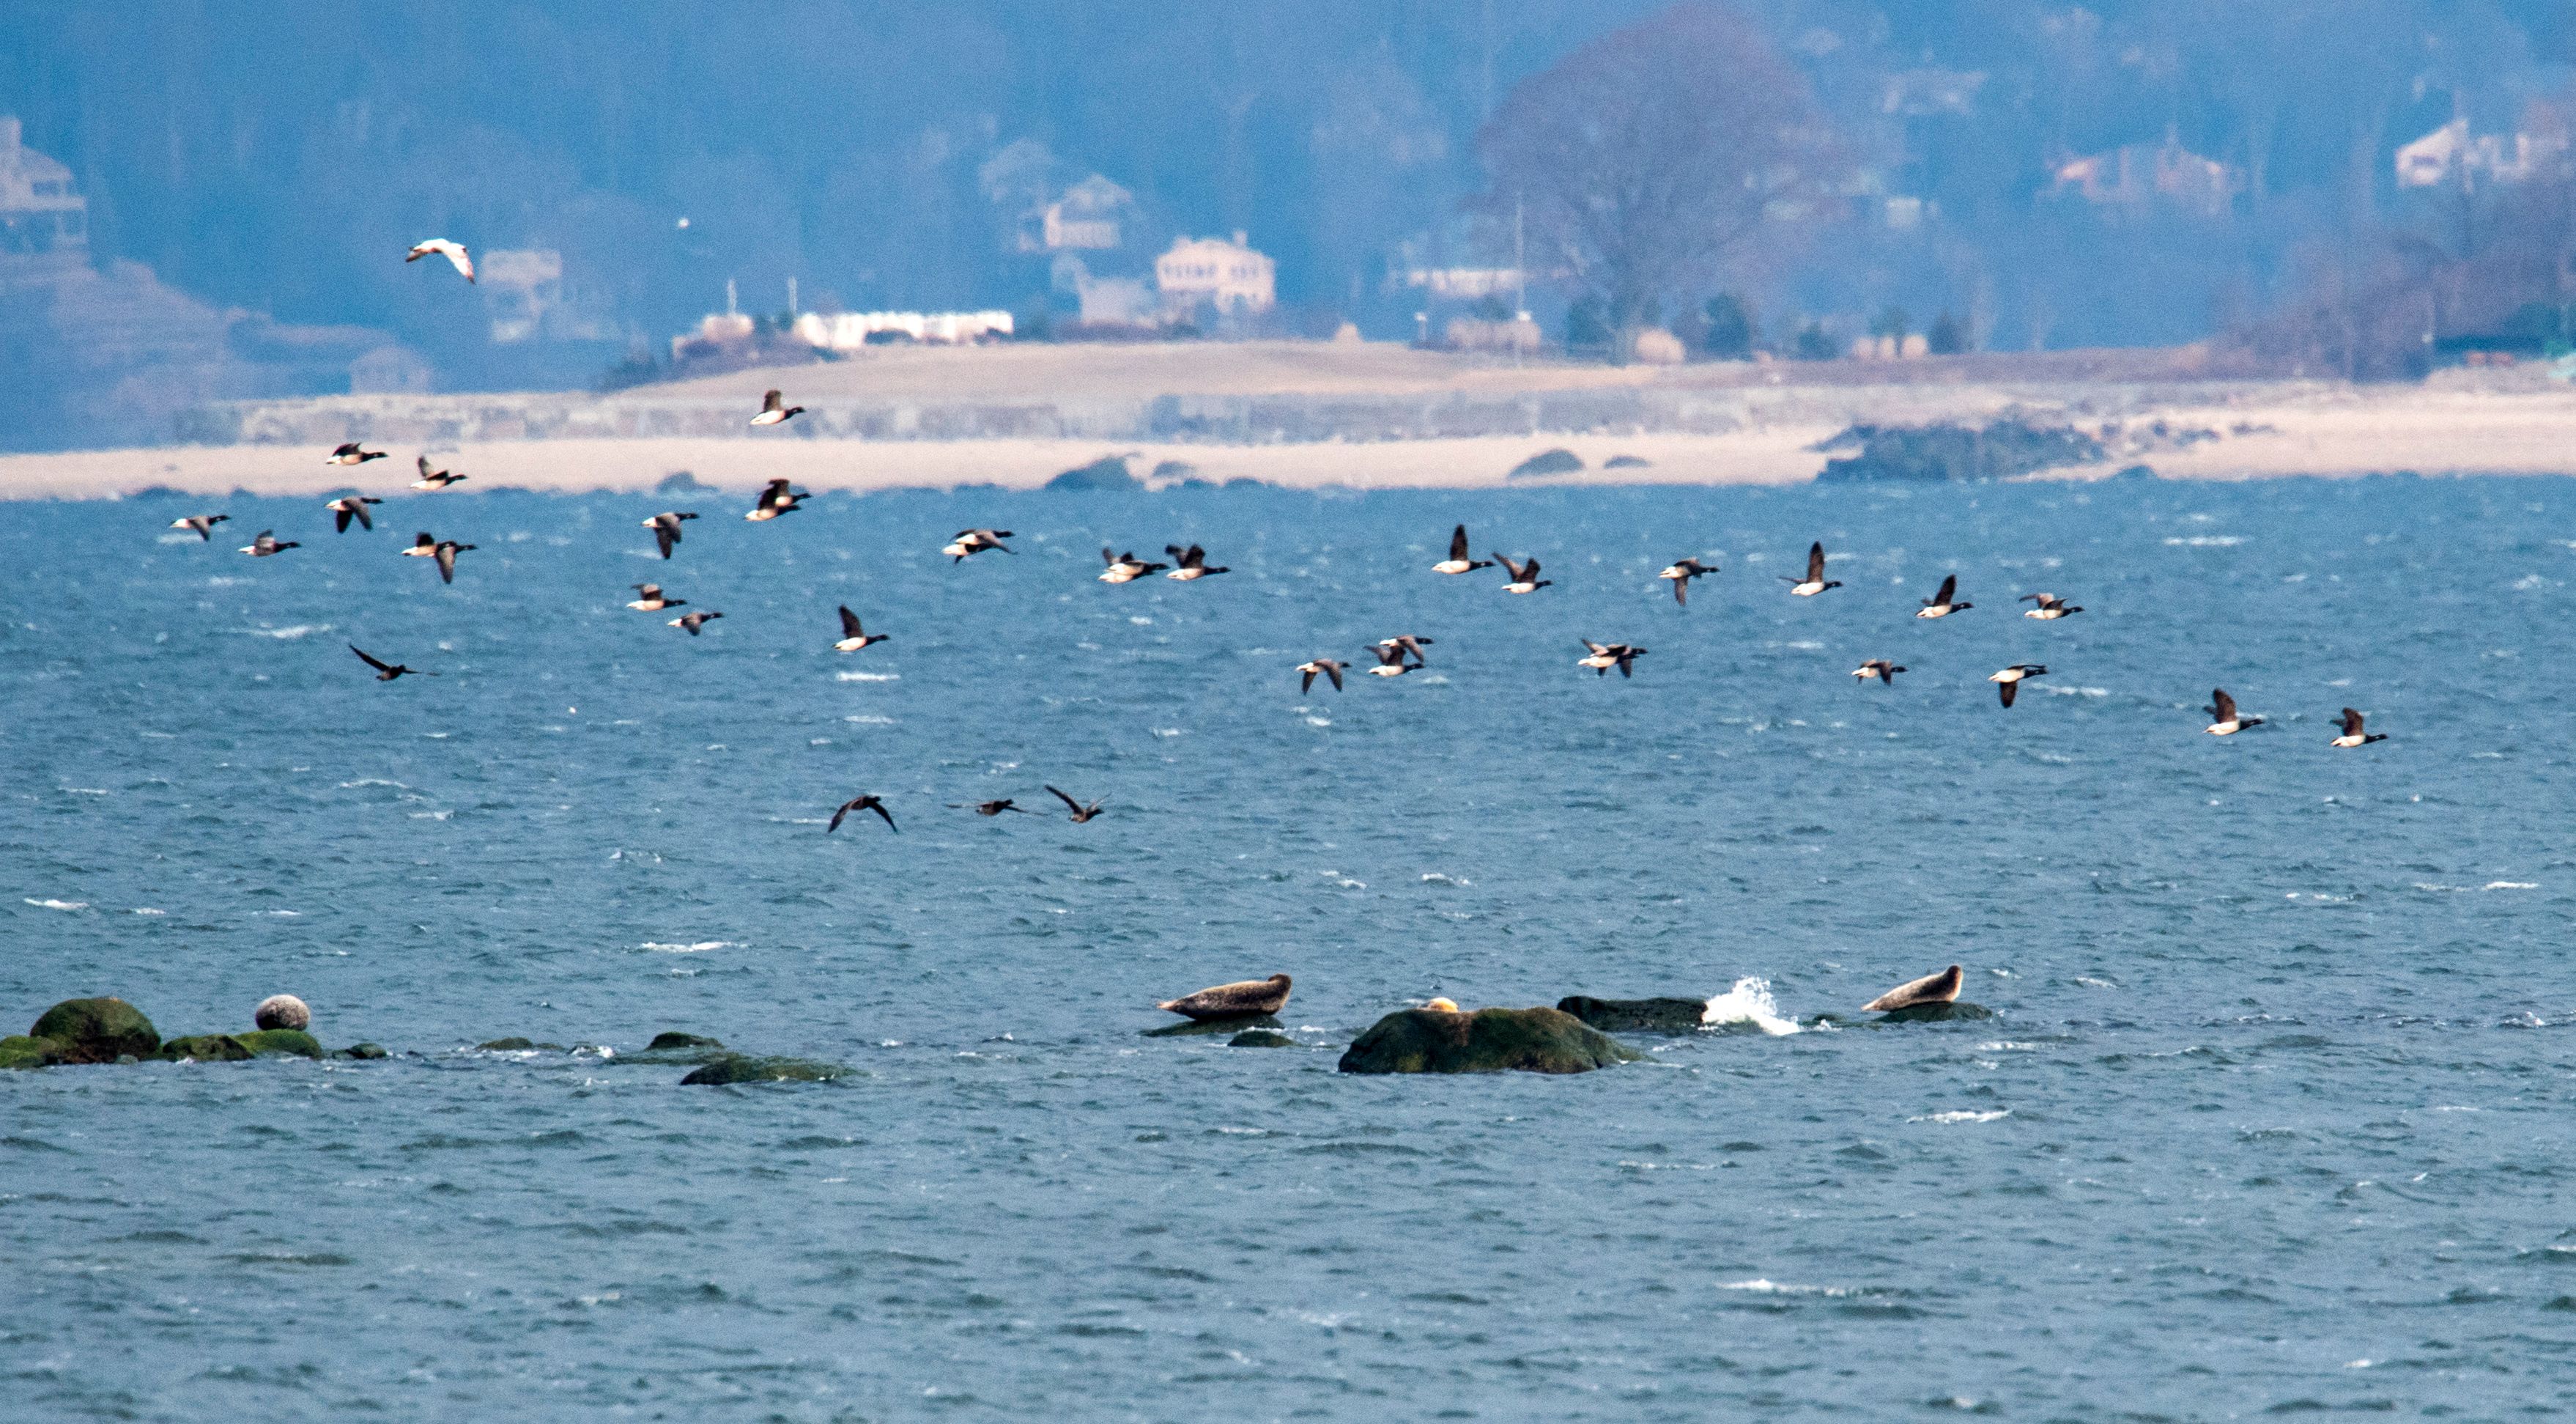 Seals rest on the rocks as a flock of birds fly overhead March 15, 2018 near Orchard Beach in New York.   From coyotes in the Bronx to red foxes in Queens, raccoons in Manhattan, owls in Brooklyn and deer in Staten Island, wildlife roams the urban jungle of New York. But coexistence is not always easy between millions of wild animals and 8.5 million humans. / AFP PHOTO / Don EMMERT / With AFP Story  by Laura BONILLA: Take a walk on New York's wild side